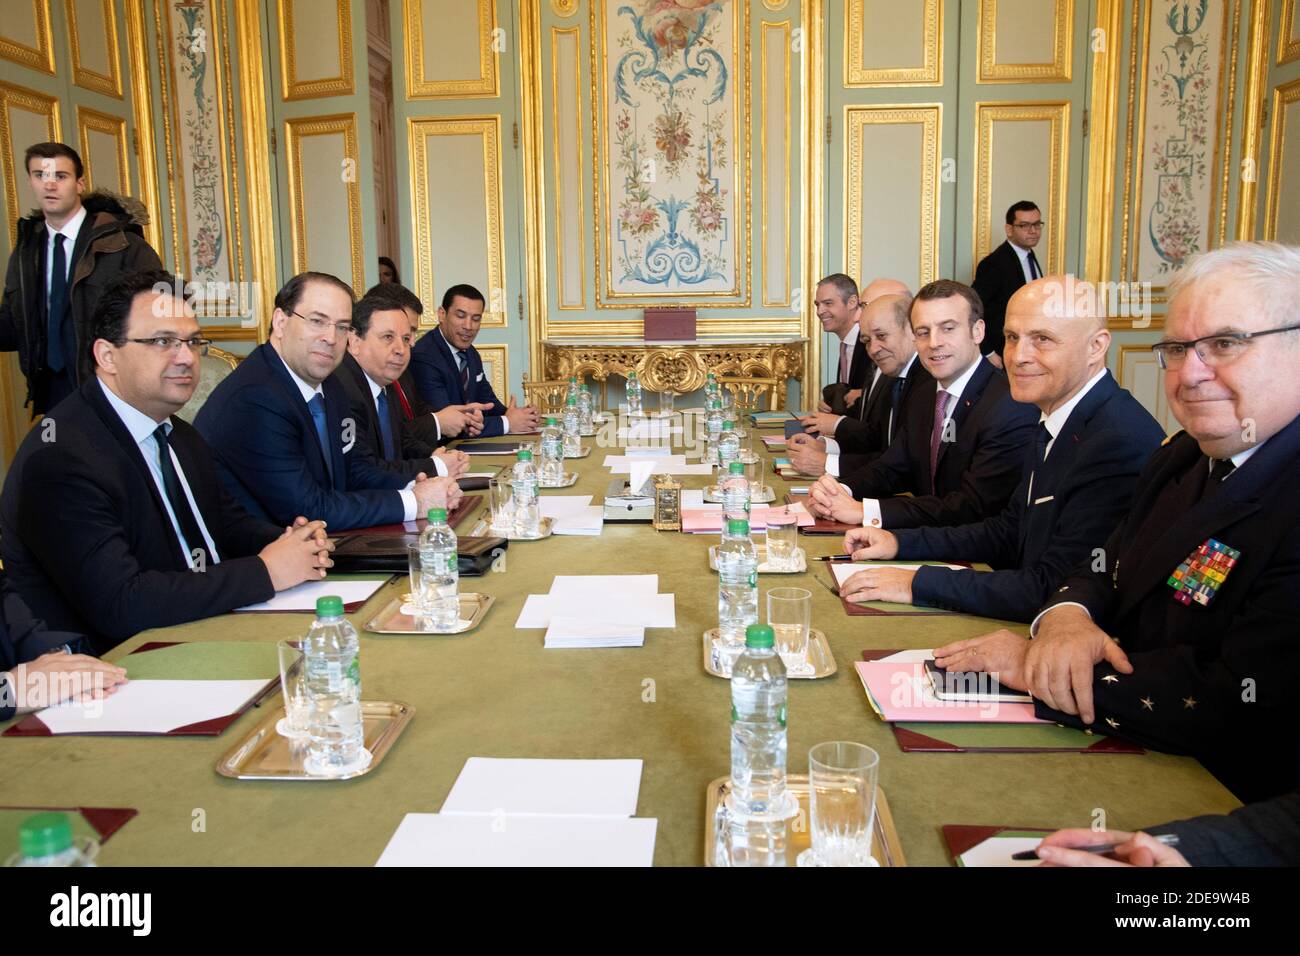 Tunisian prime minister Youssef Chahed (3L) and his delegation meets with  French president Emmanuel Macron (3R), Foreign Affairs minister Jean-Yves  Le Drian (4R), diplomatic advisor Philippe Etienne (5R), French ambassador  in Tunisia